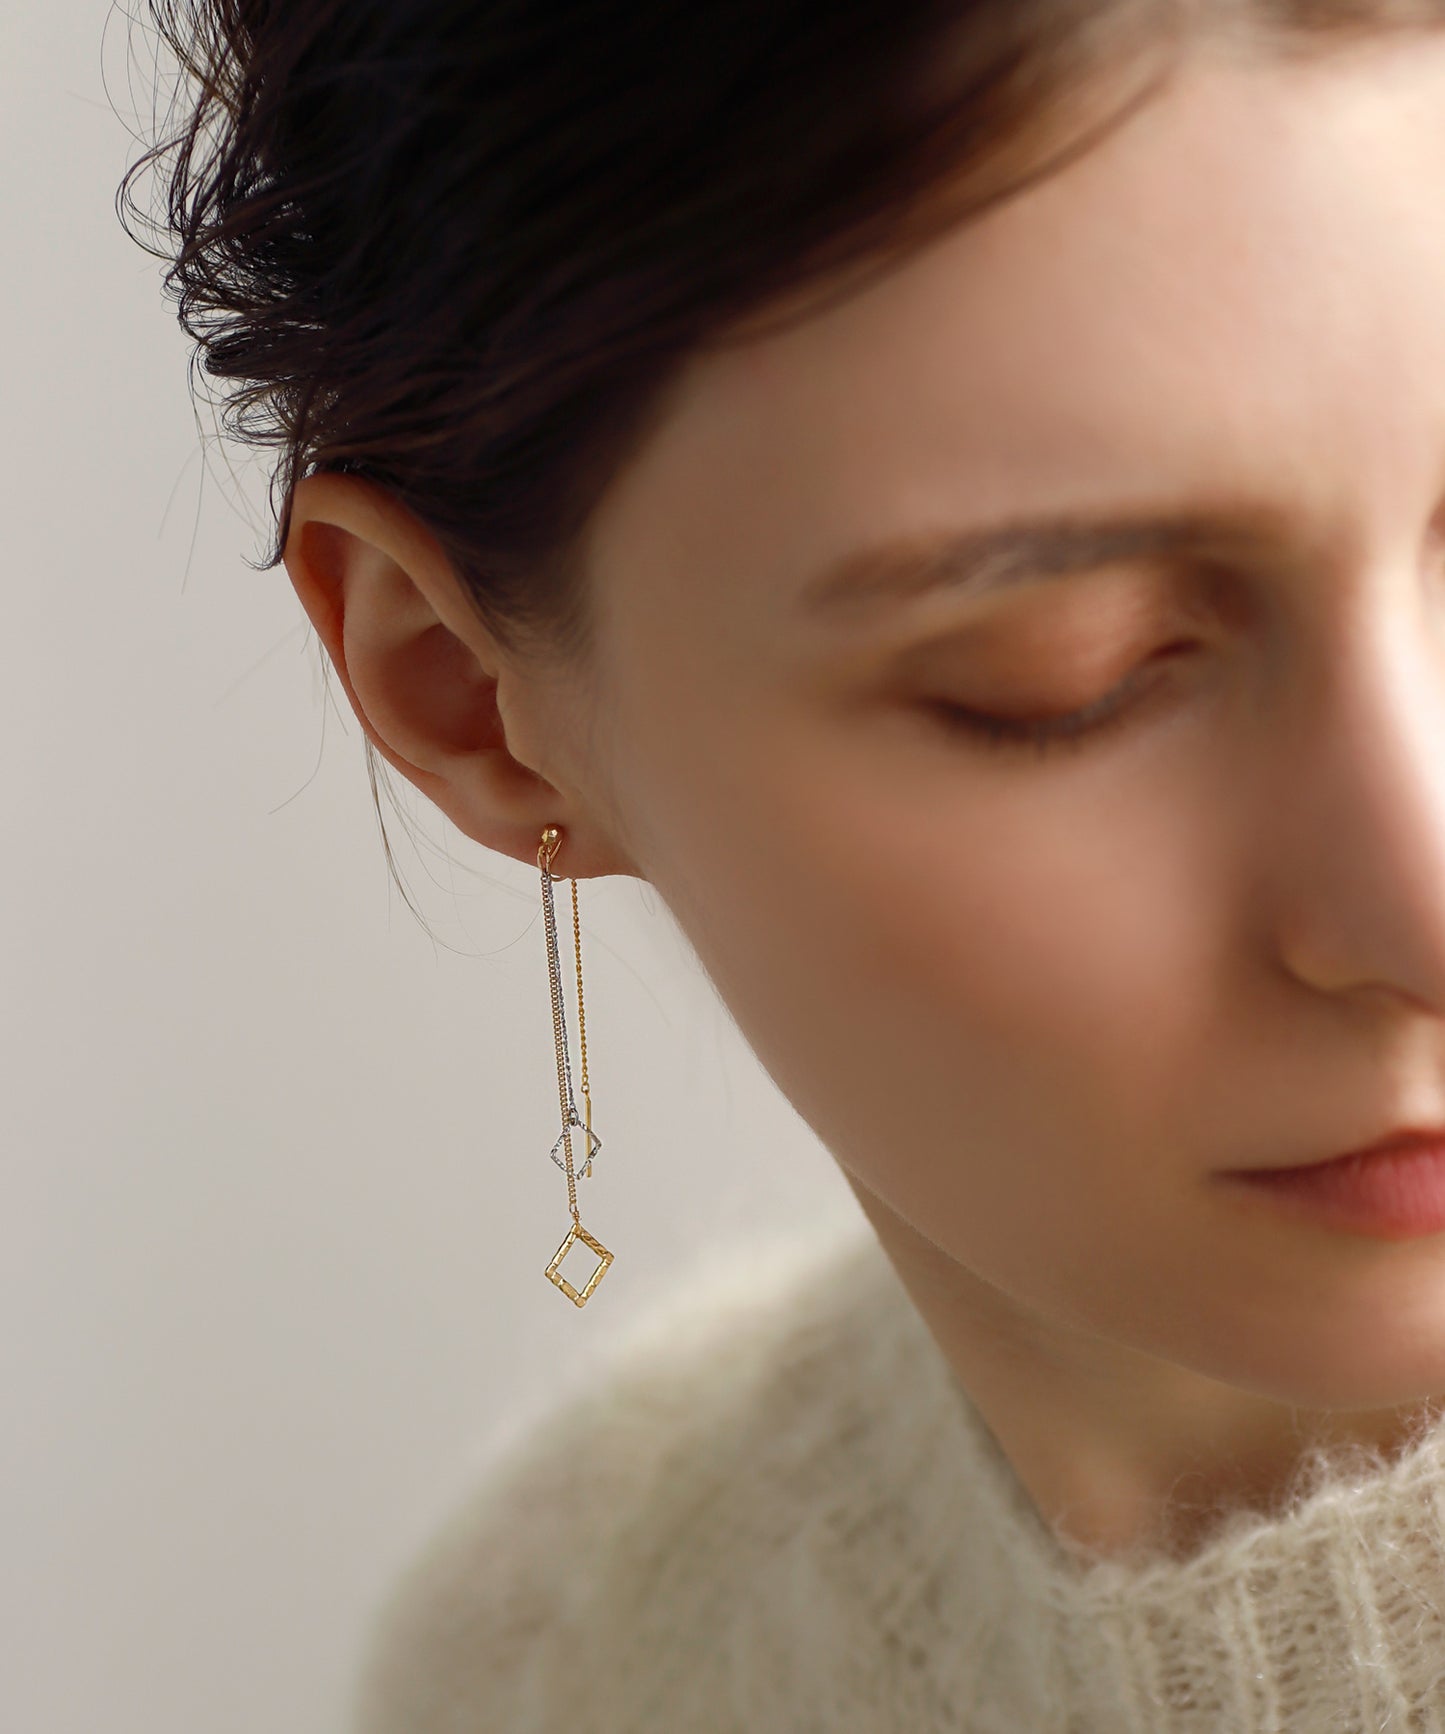 【Online Store Limited】Bicolor Square Long Clip On Earrings [Sheerchic]